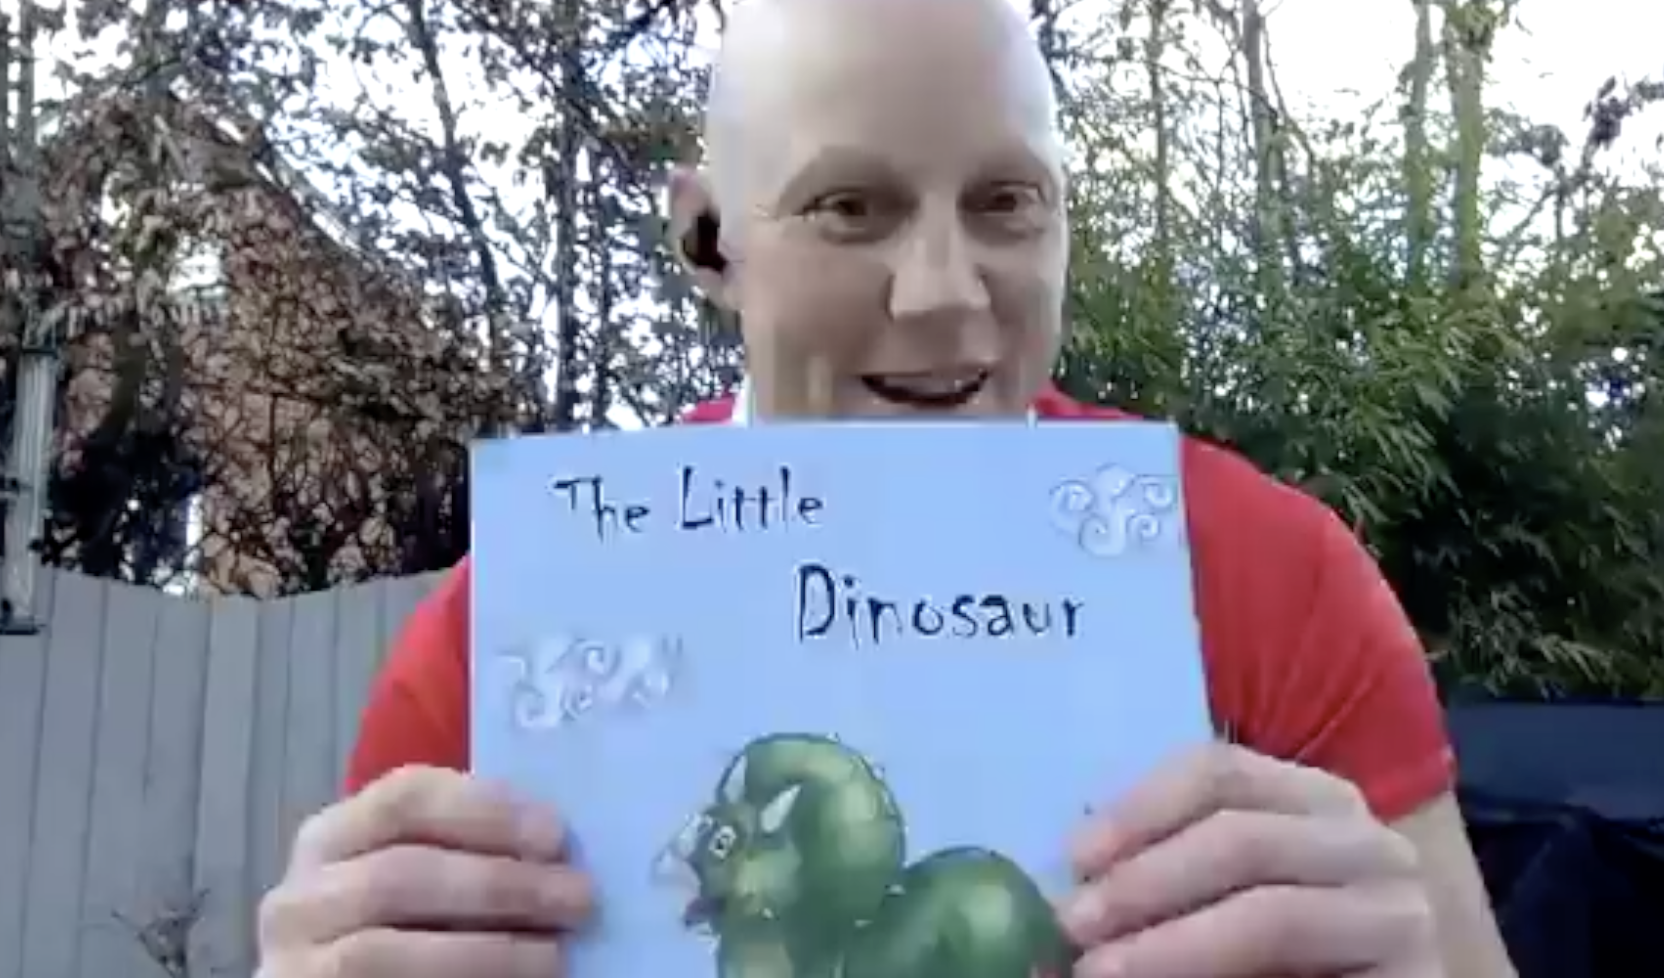 England star Heather Fisher holds up a book called The Little Dinosaur